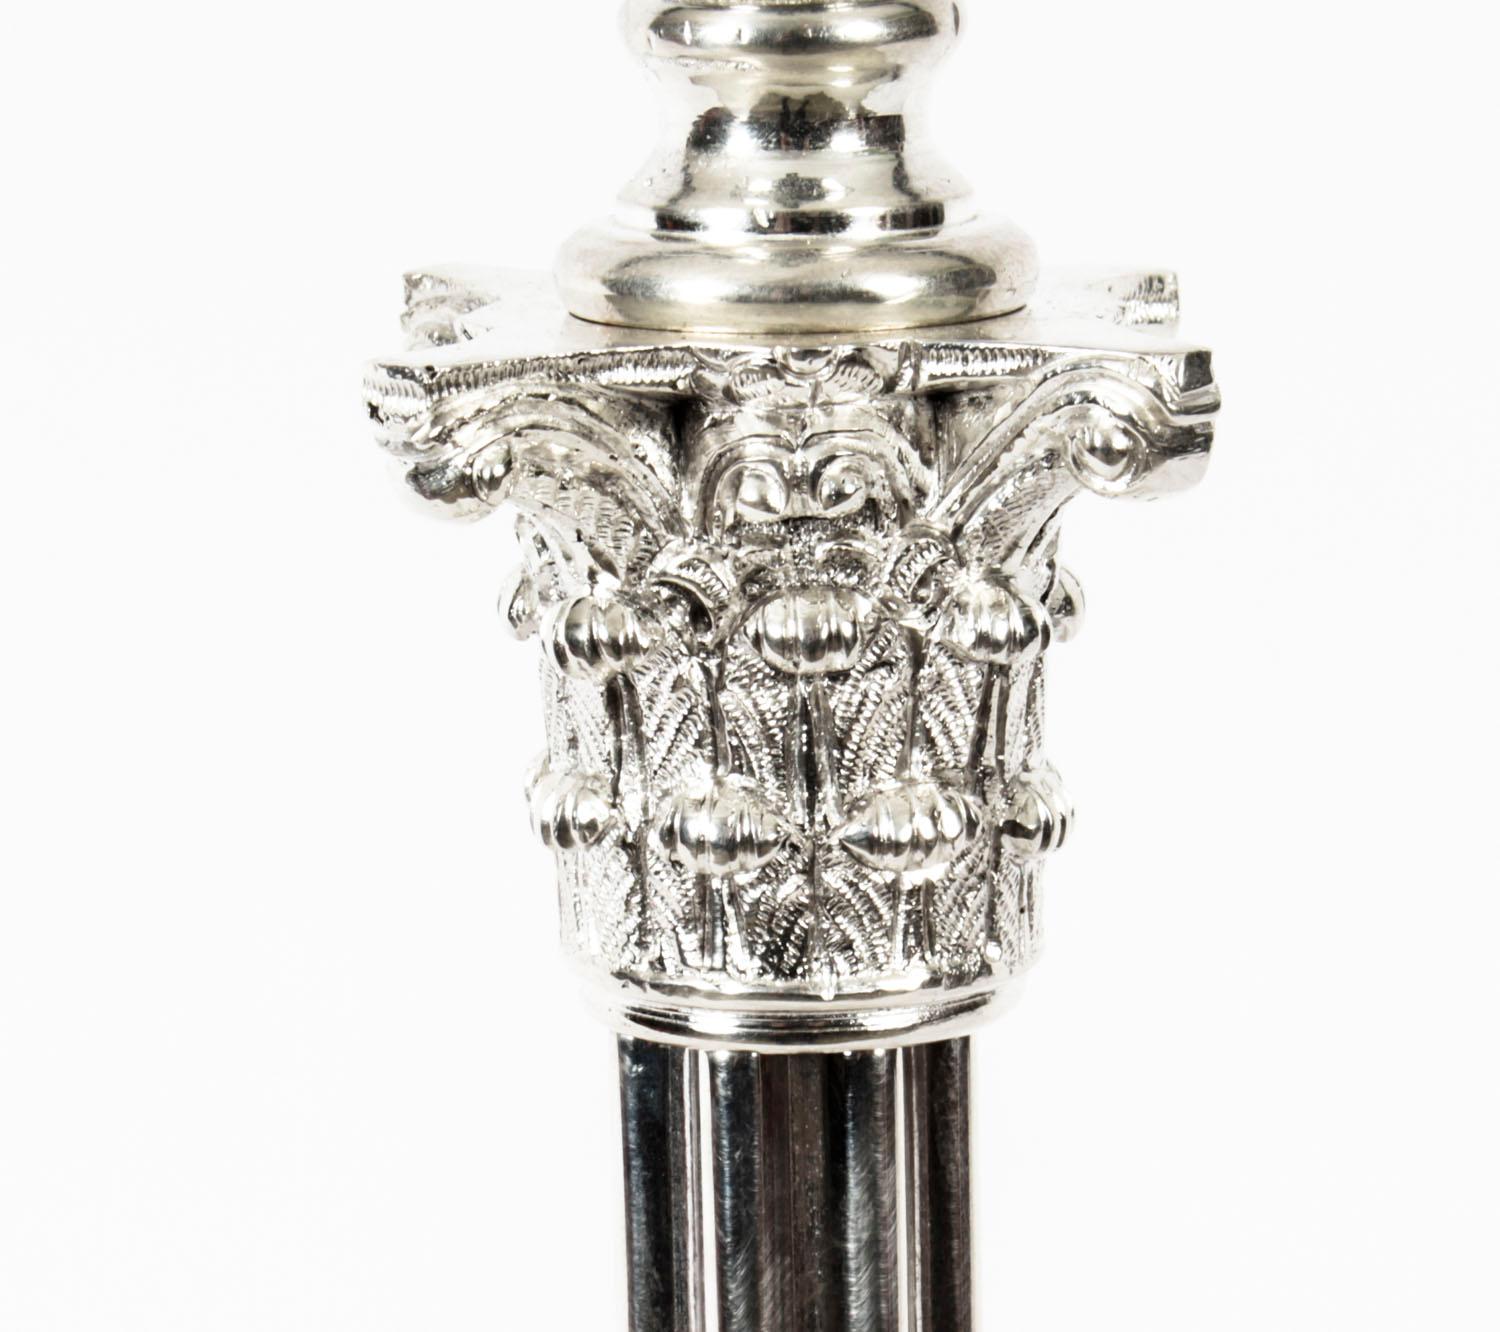 Antique Edwardian Silver Plated Corinthian Column Table Lamp, Early 20th Century For Sale 1